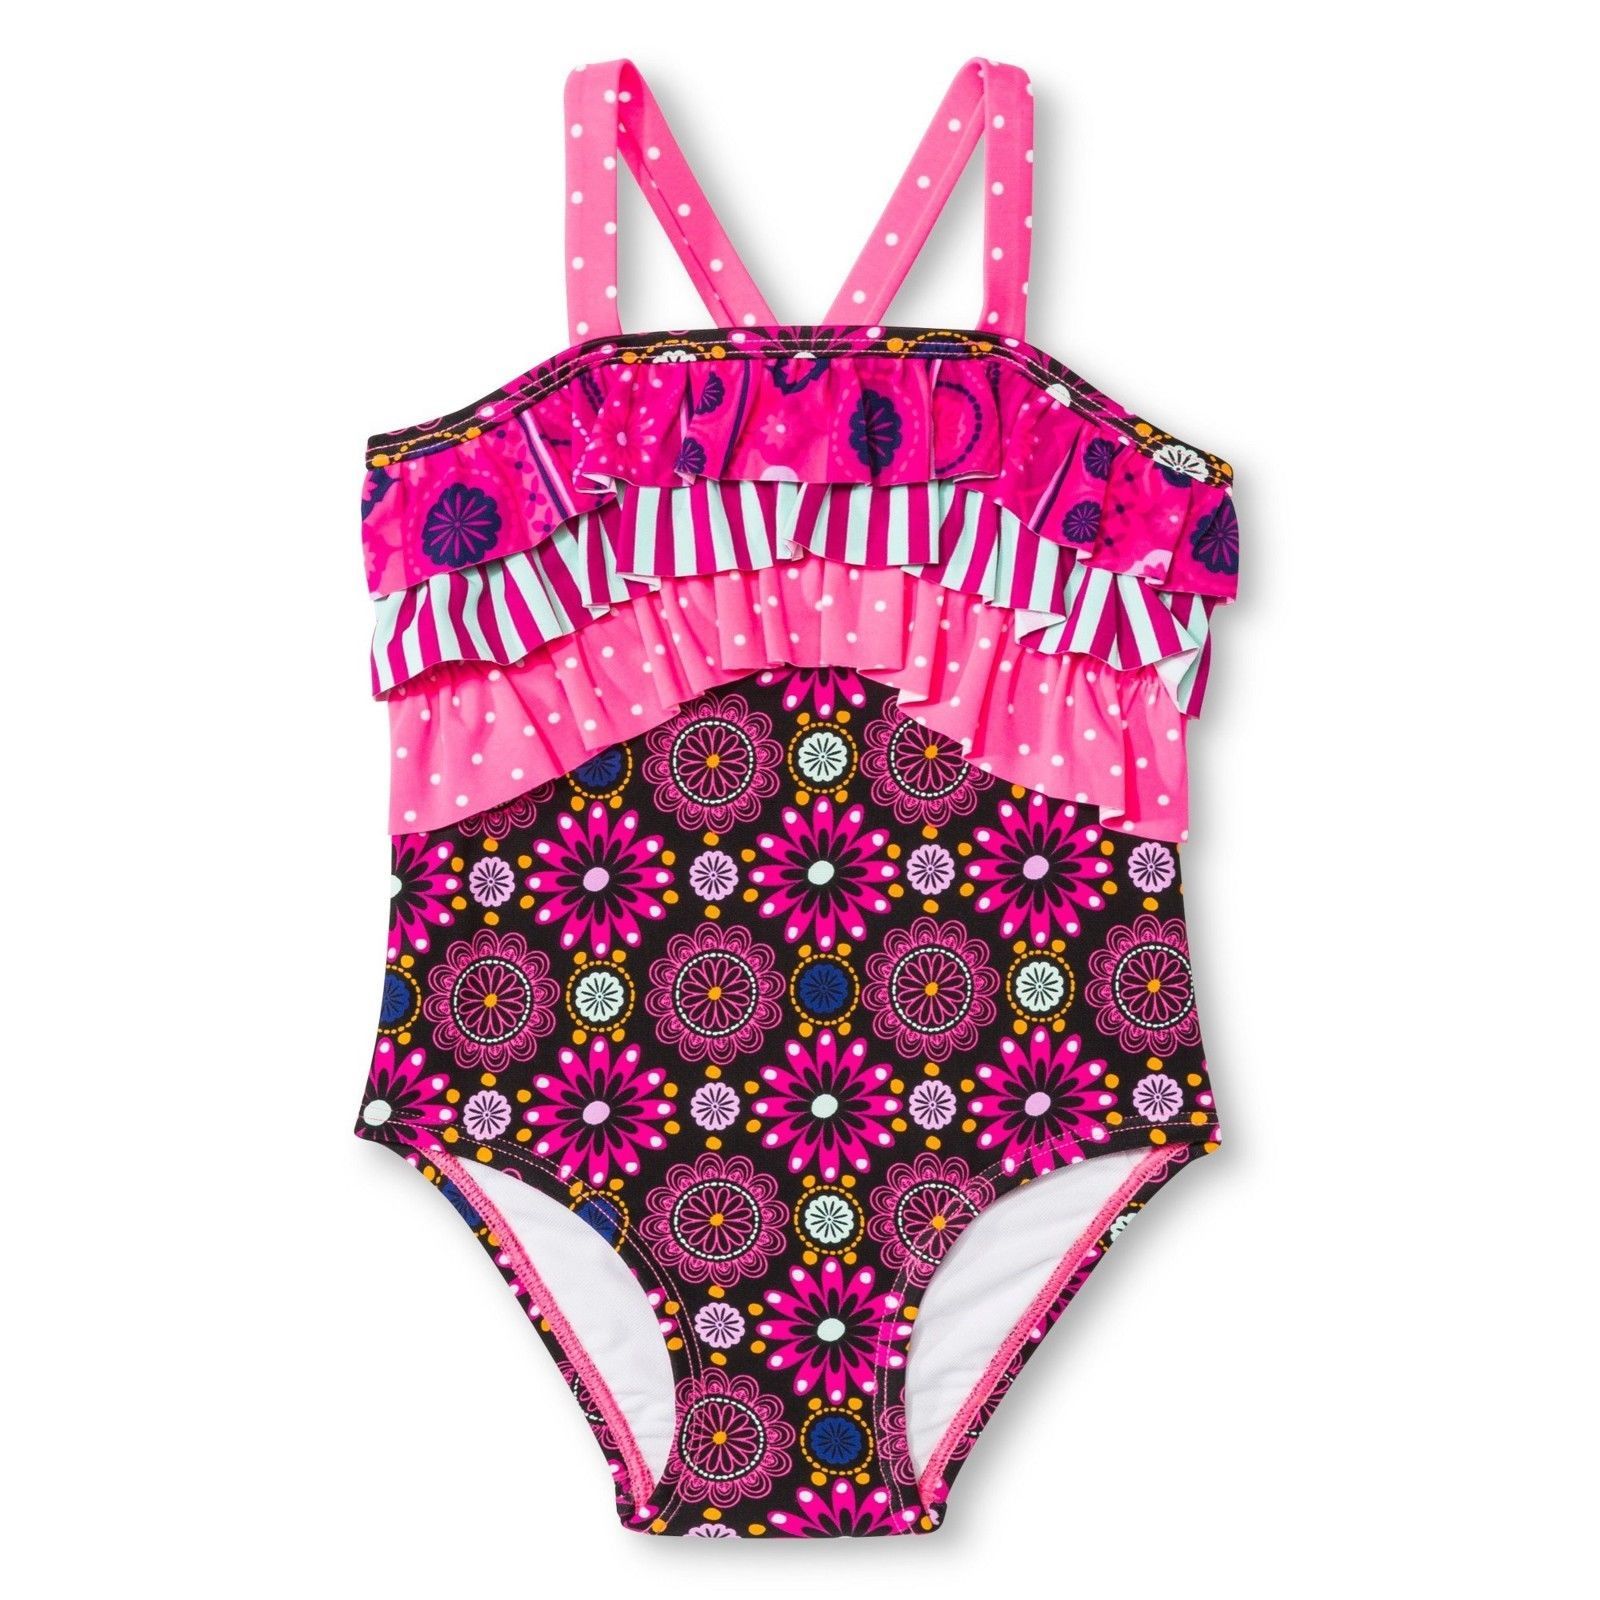 Circo Baby Girls' Floral One Piece Swimsuit (12 Months, Multicolor) - $24.54